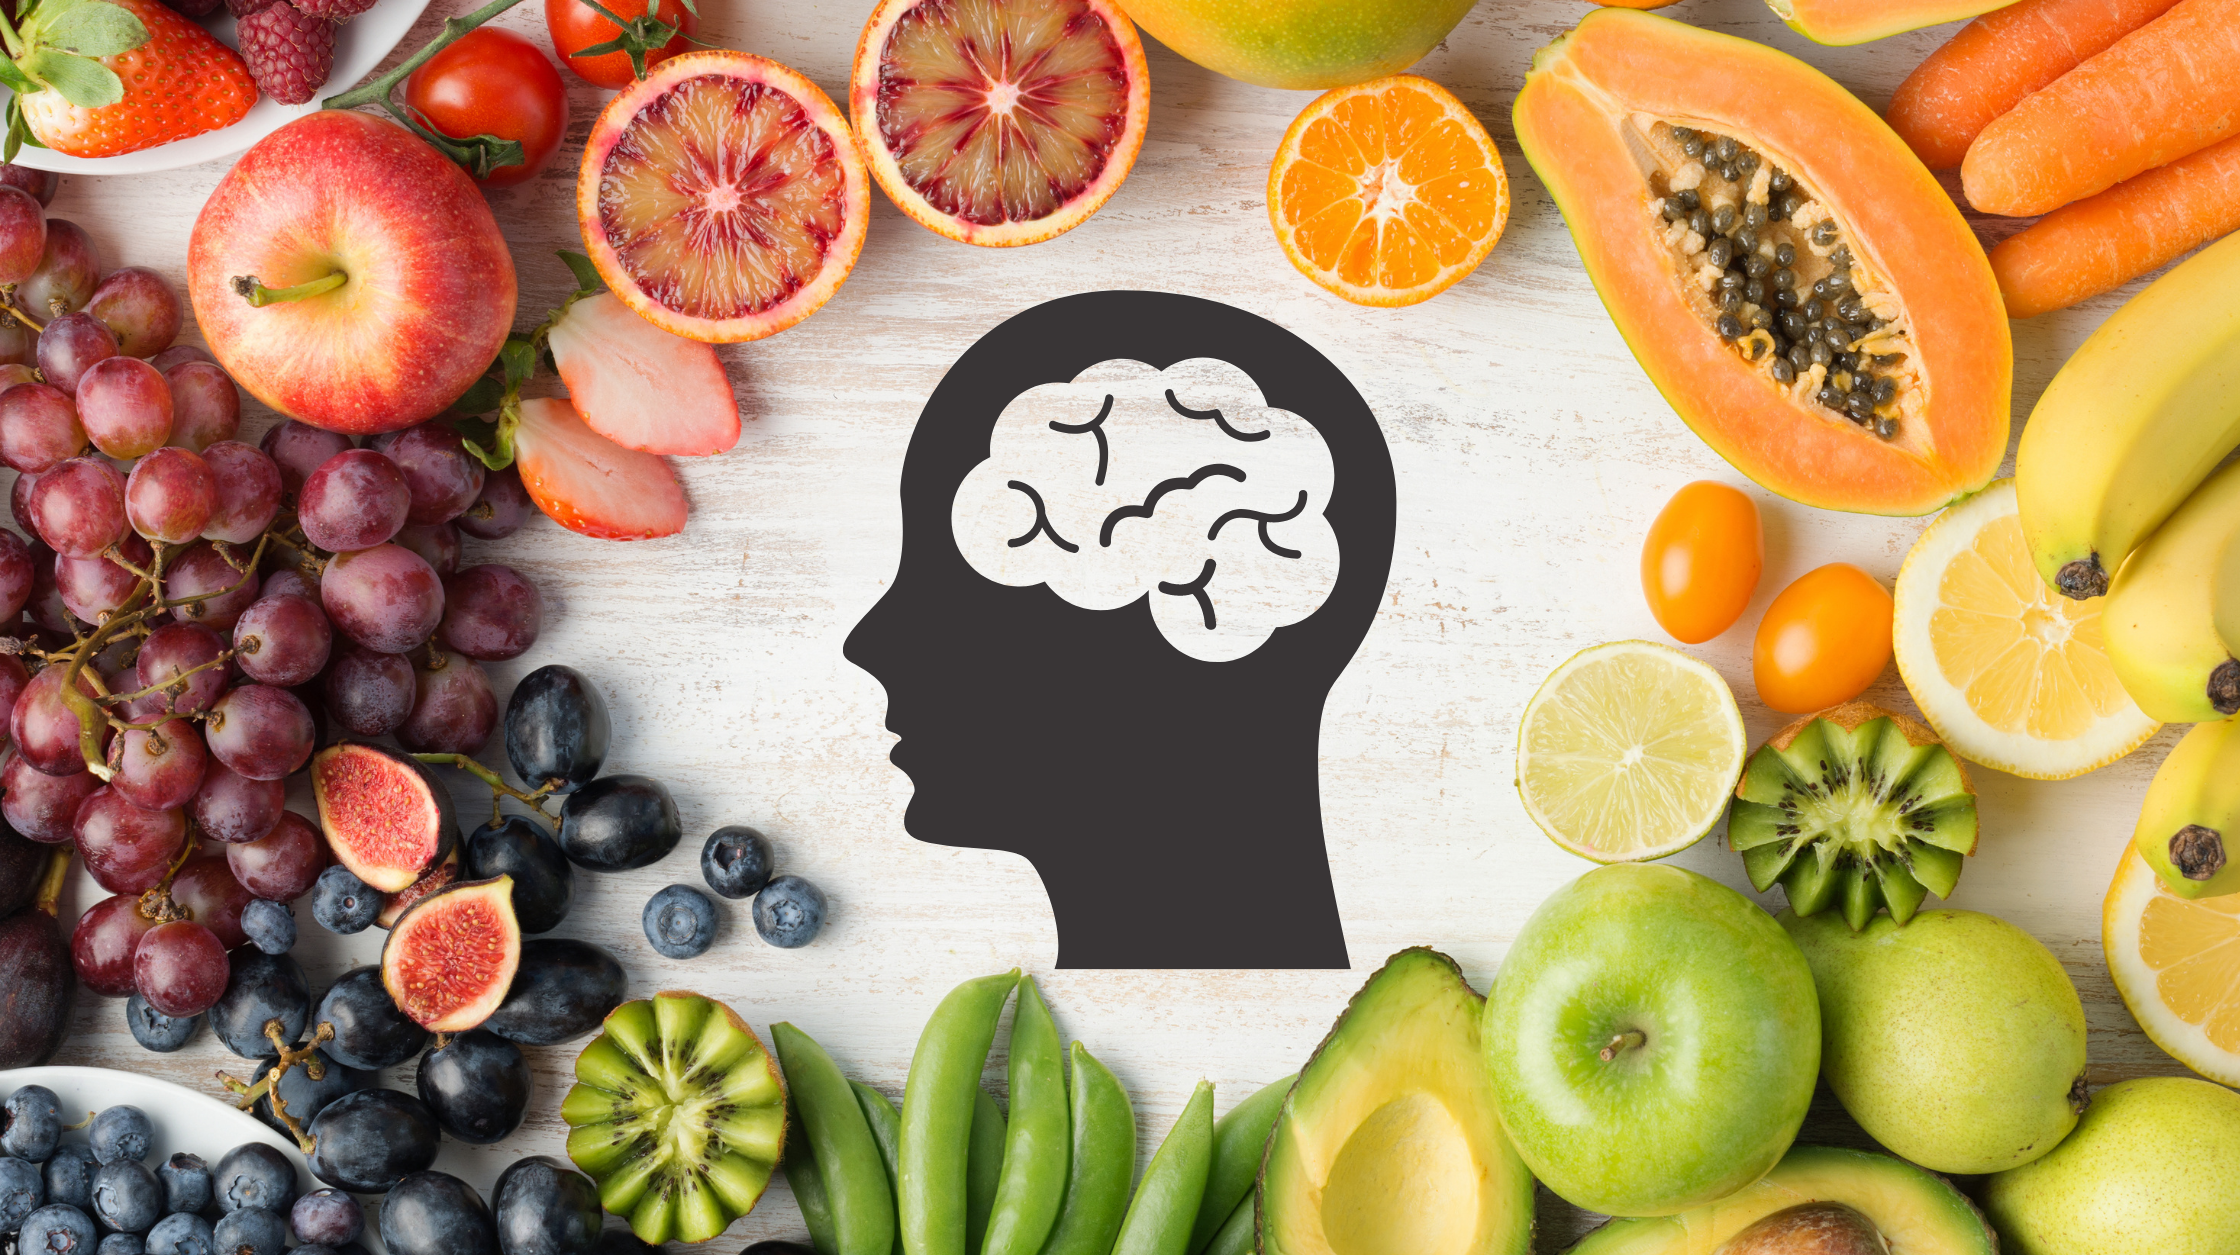 How Your Food Choices Impact Your Mental Health